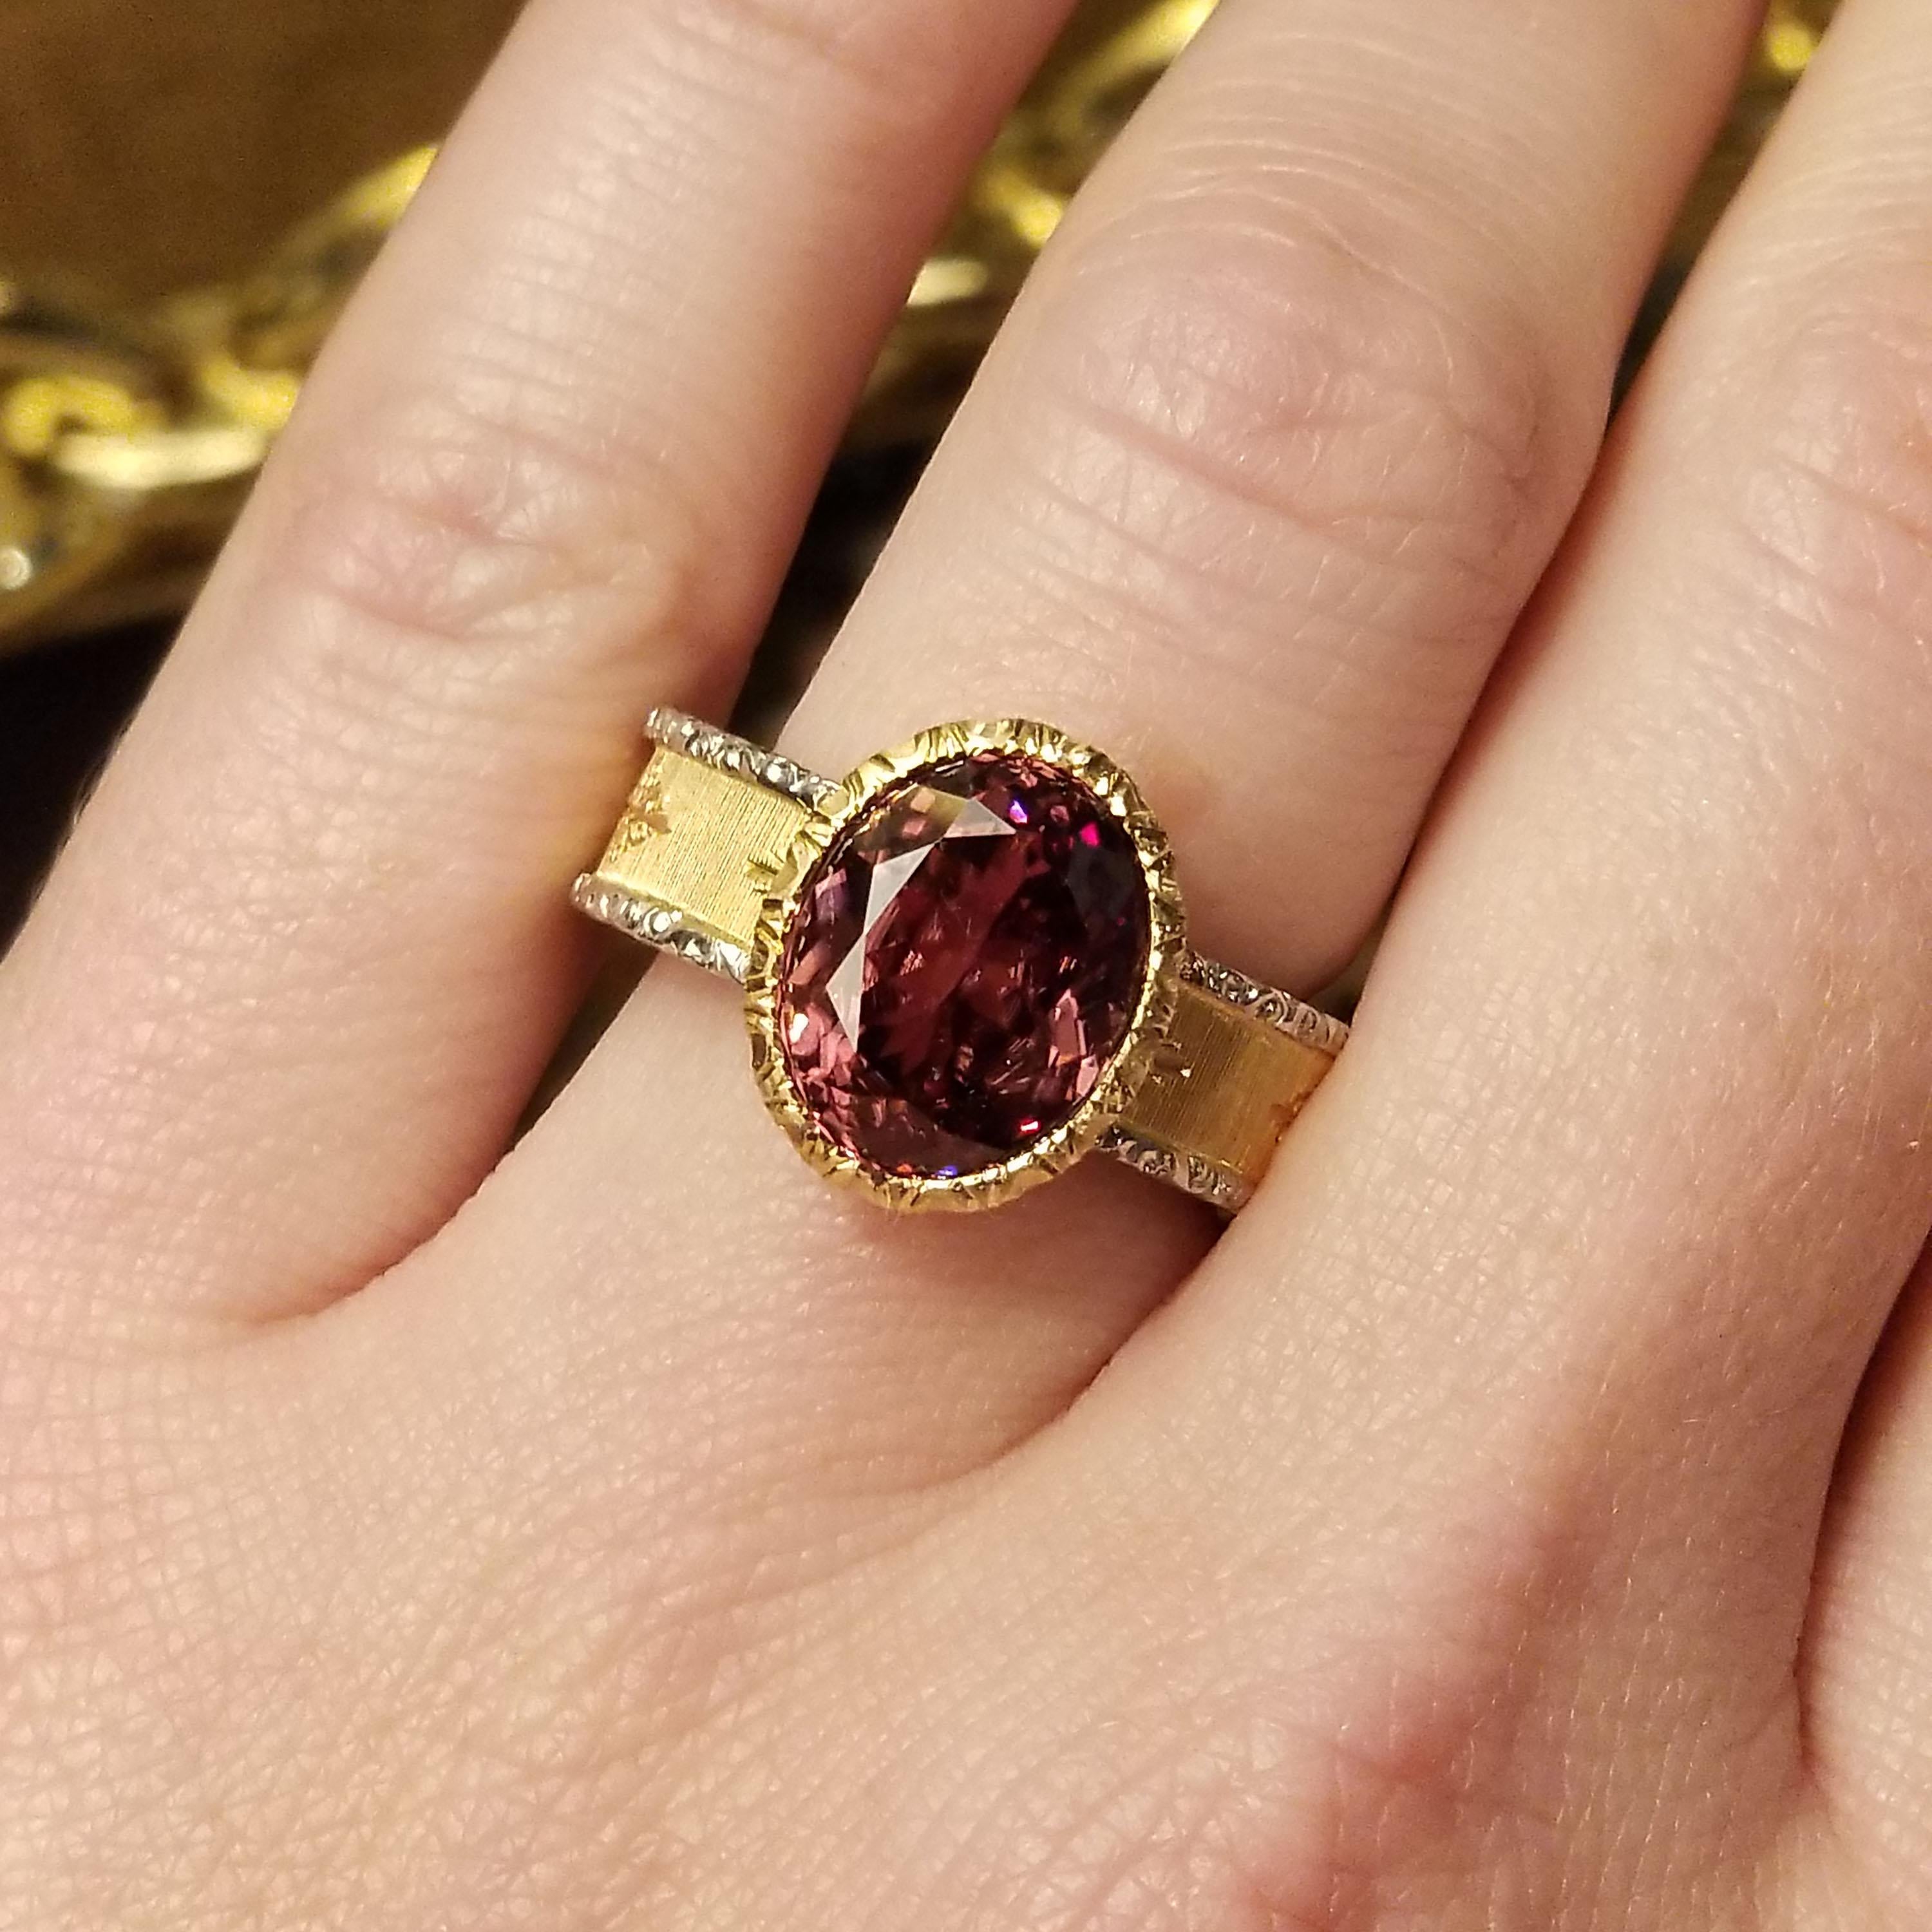 One of my favorite things is the sheer delight that my customers experience at the surprise of how amazing a zircon can look when cut properly. This is a 5.78ct pink zircon, mined in Tanzania, and it is cut to absolute perfection. The clean style of